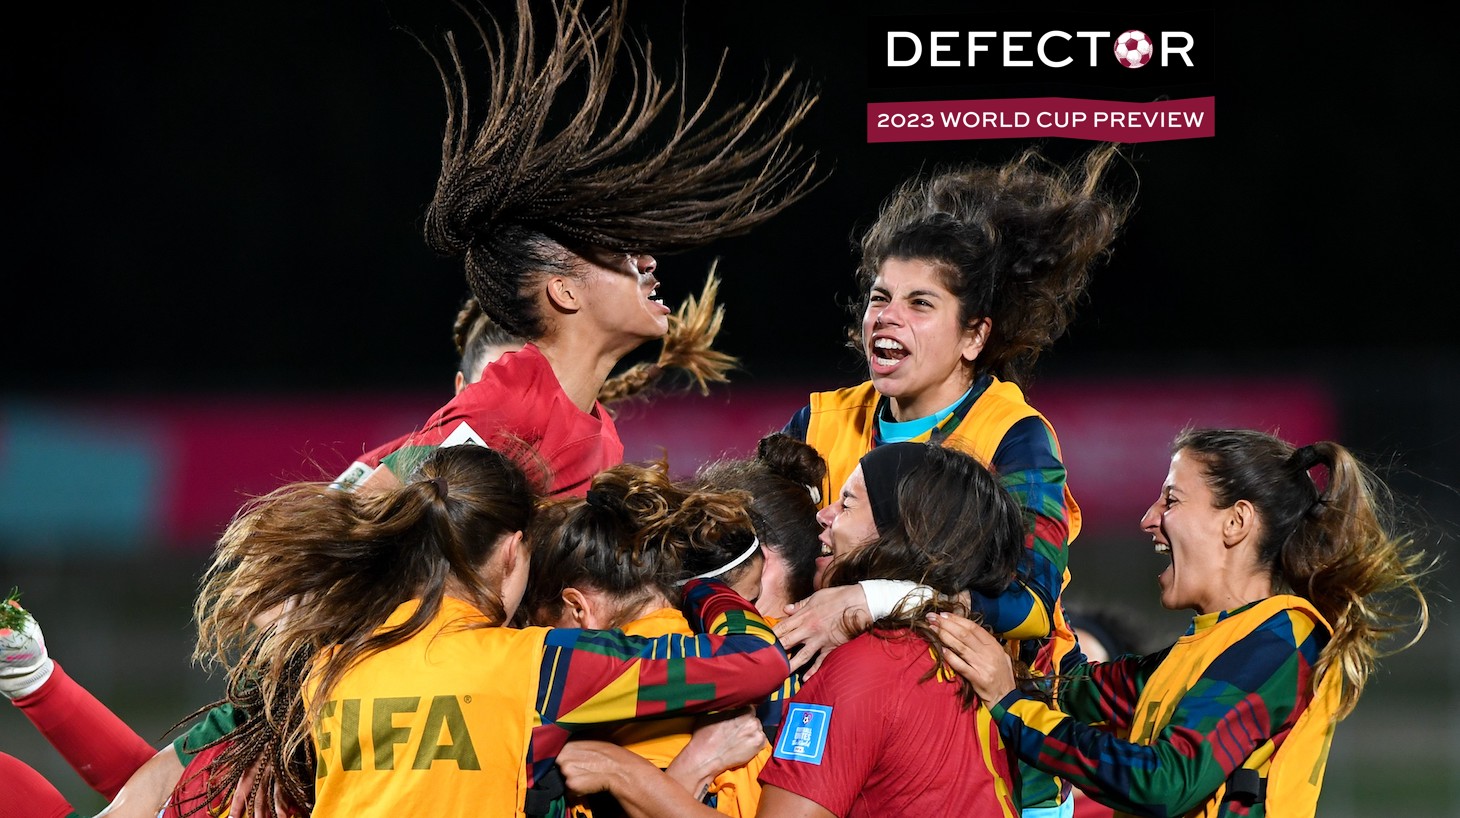 Portugal's players celebrate scoring during a group A play-off tournament match between Portugal and Cameroon for the FIFA Women's World Cup Australia and New Zealand 2023 at the Waikato Stadium in Hamilton, New Zealand, Feb. 22, 2023.